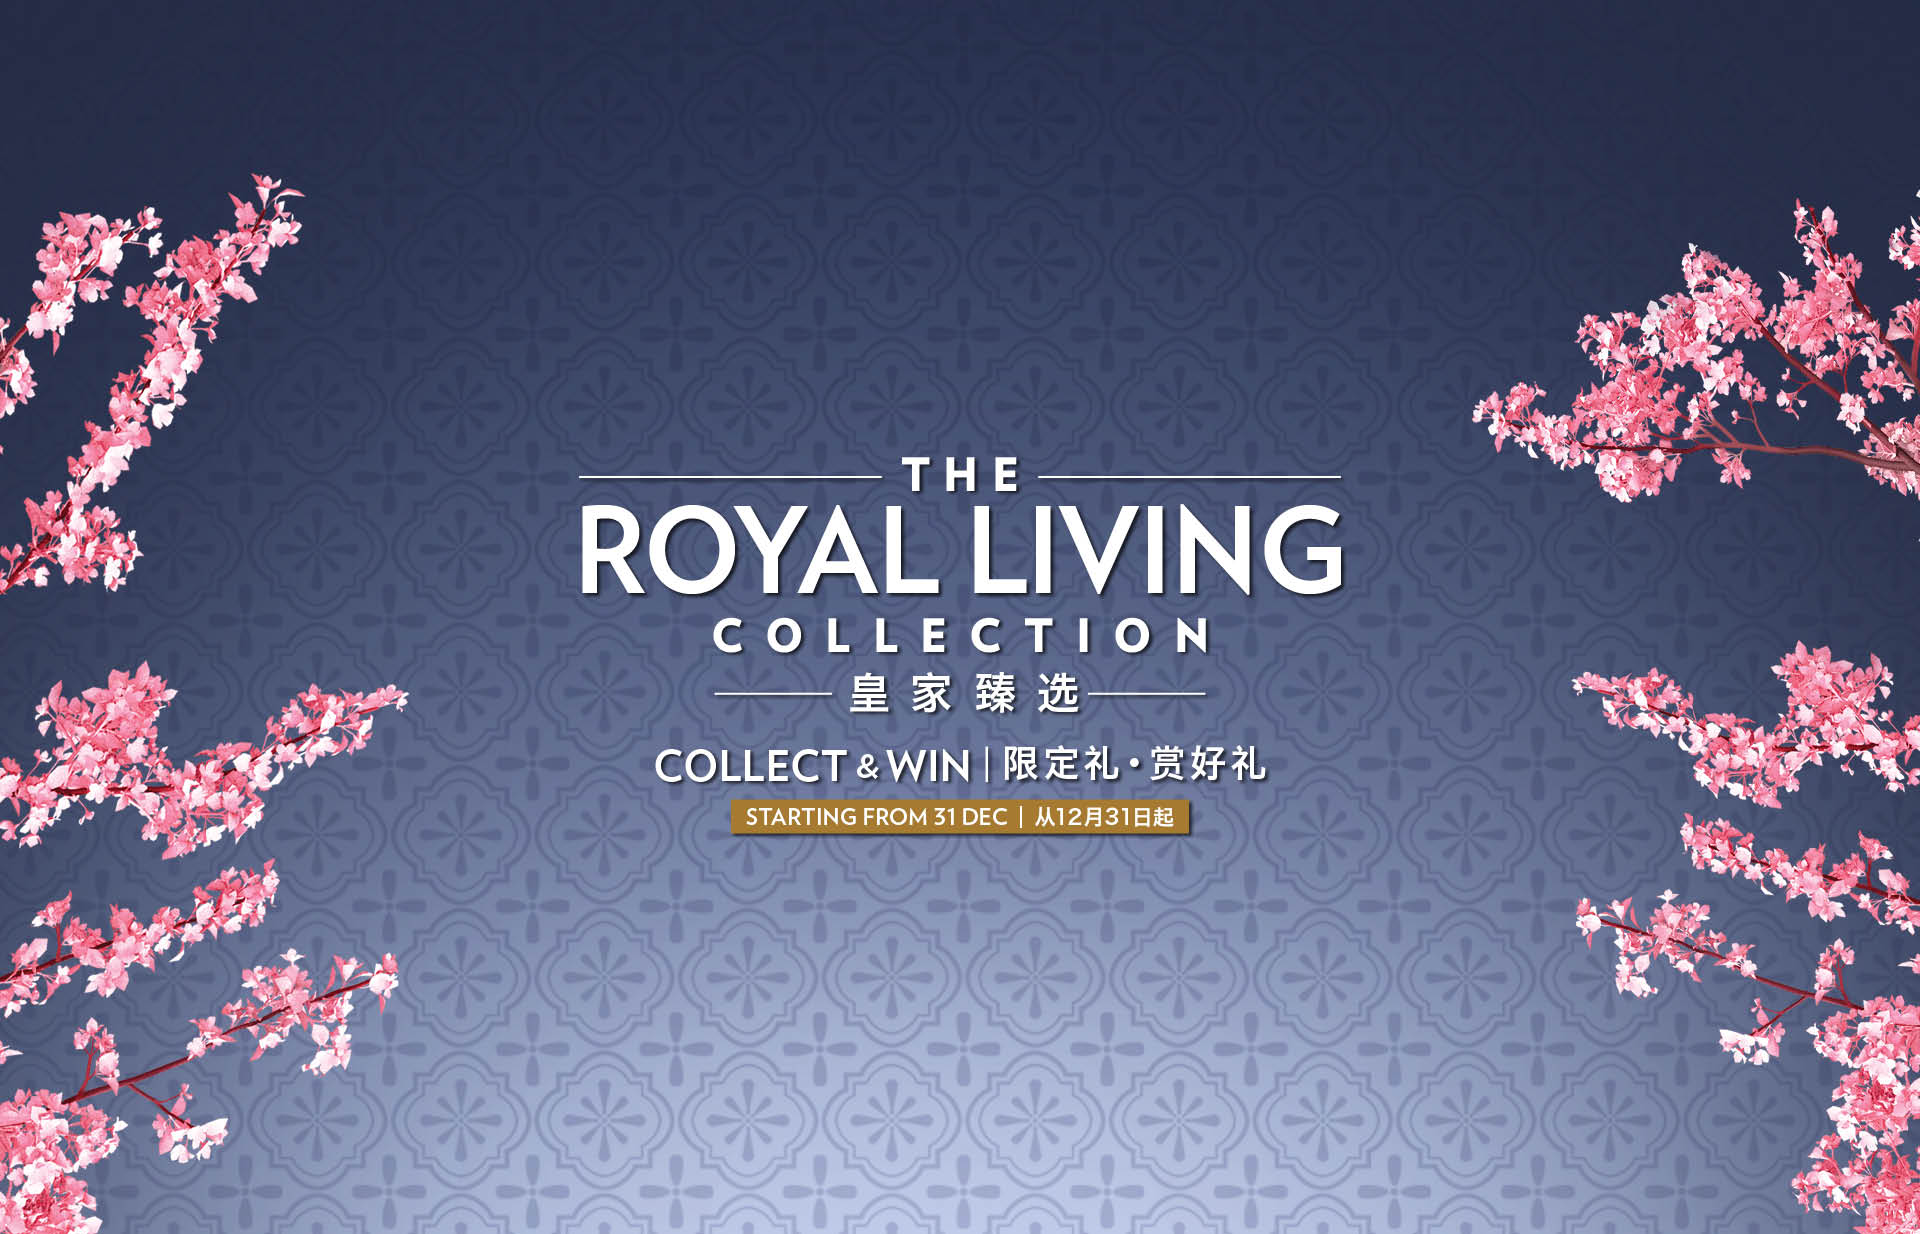 The Royal Living Collection